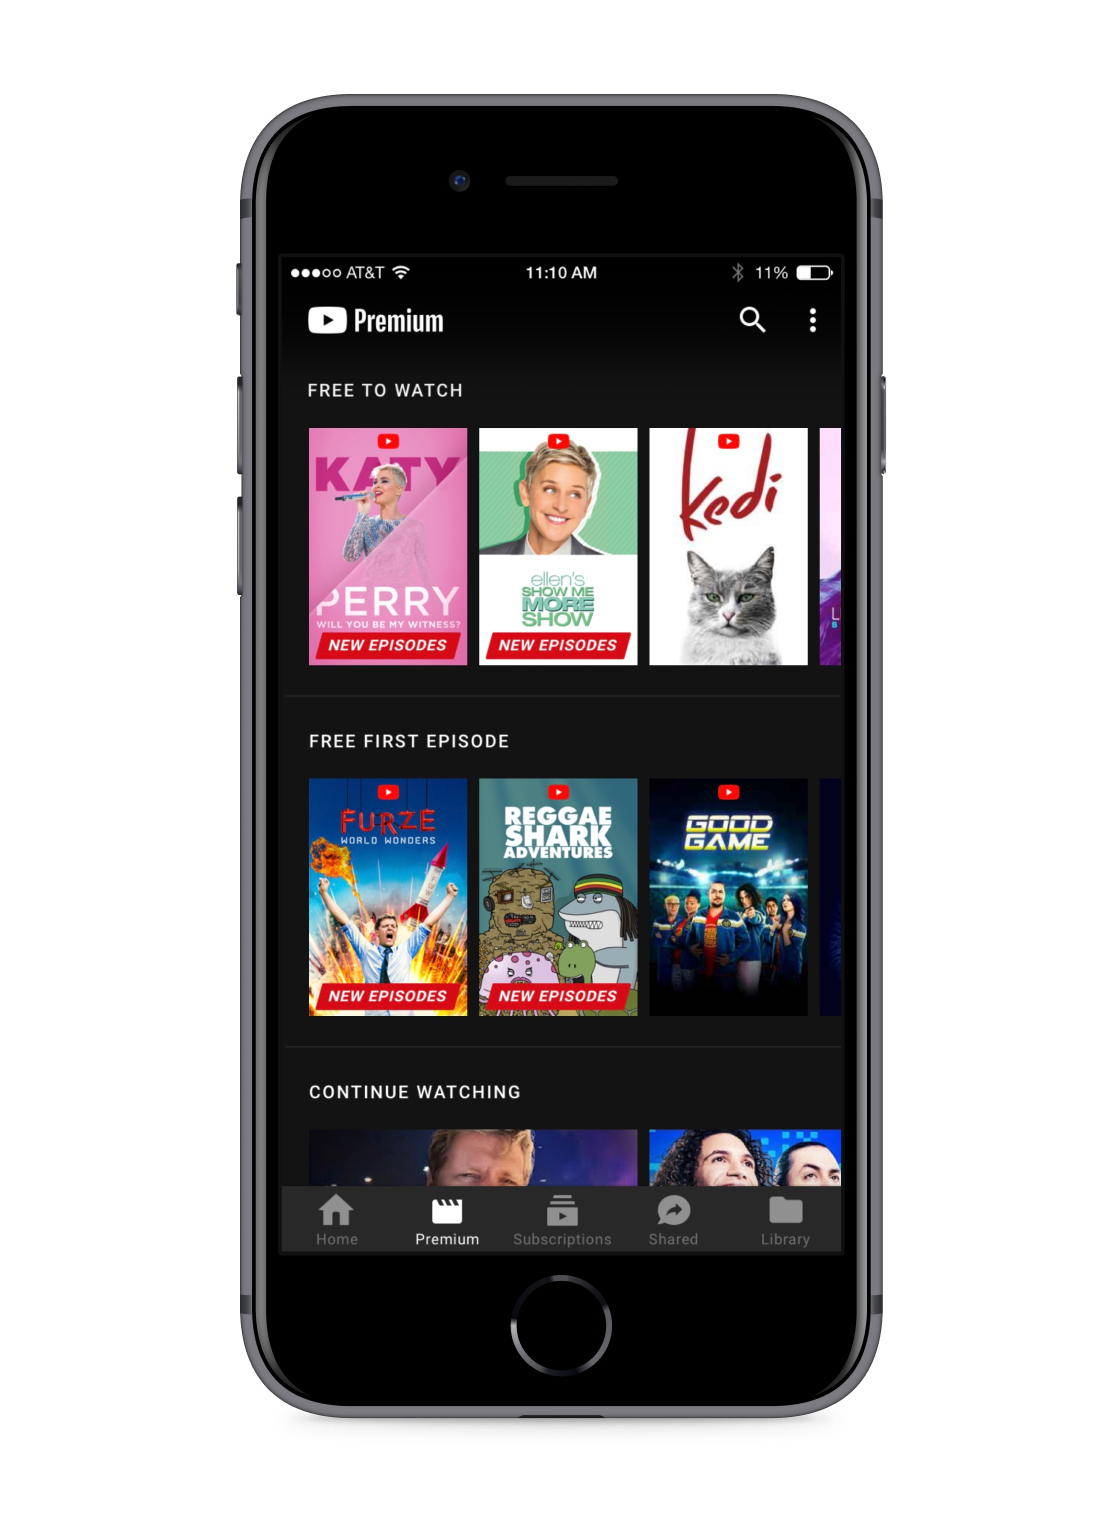 A phone with the YouTube app open browsing movies & shows